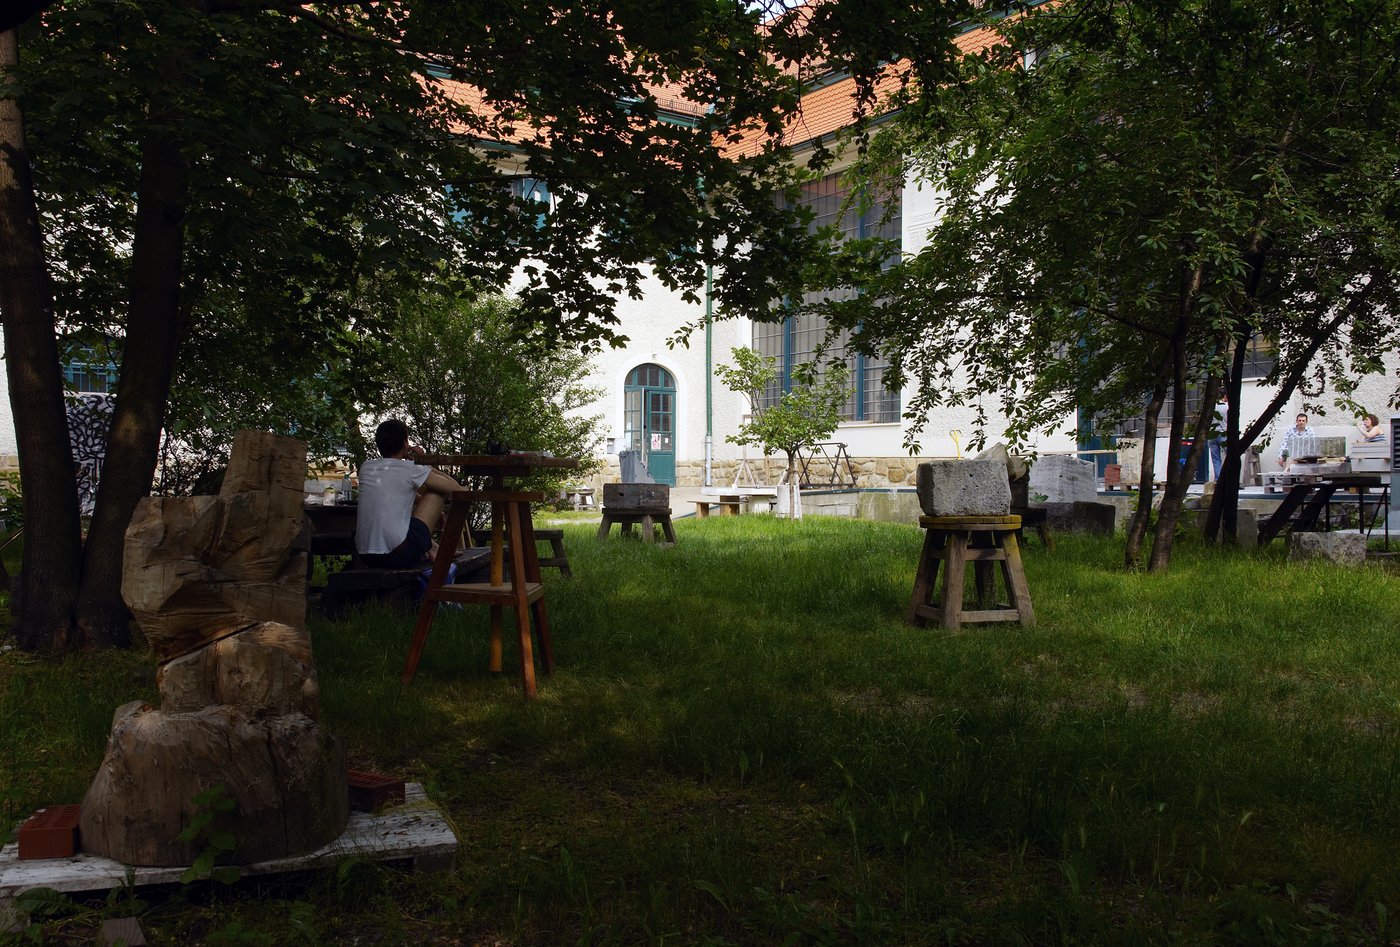 In a summer garden, a young man sits with his back turned, his legs drawn up, wearing a white T-shirt. He is surrounded by wood and stone sculptures. In the background you can see the historic building with the large studio windows.